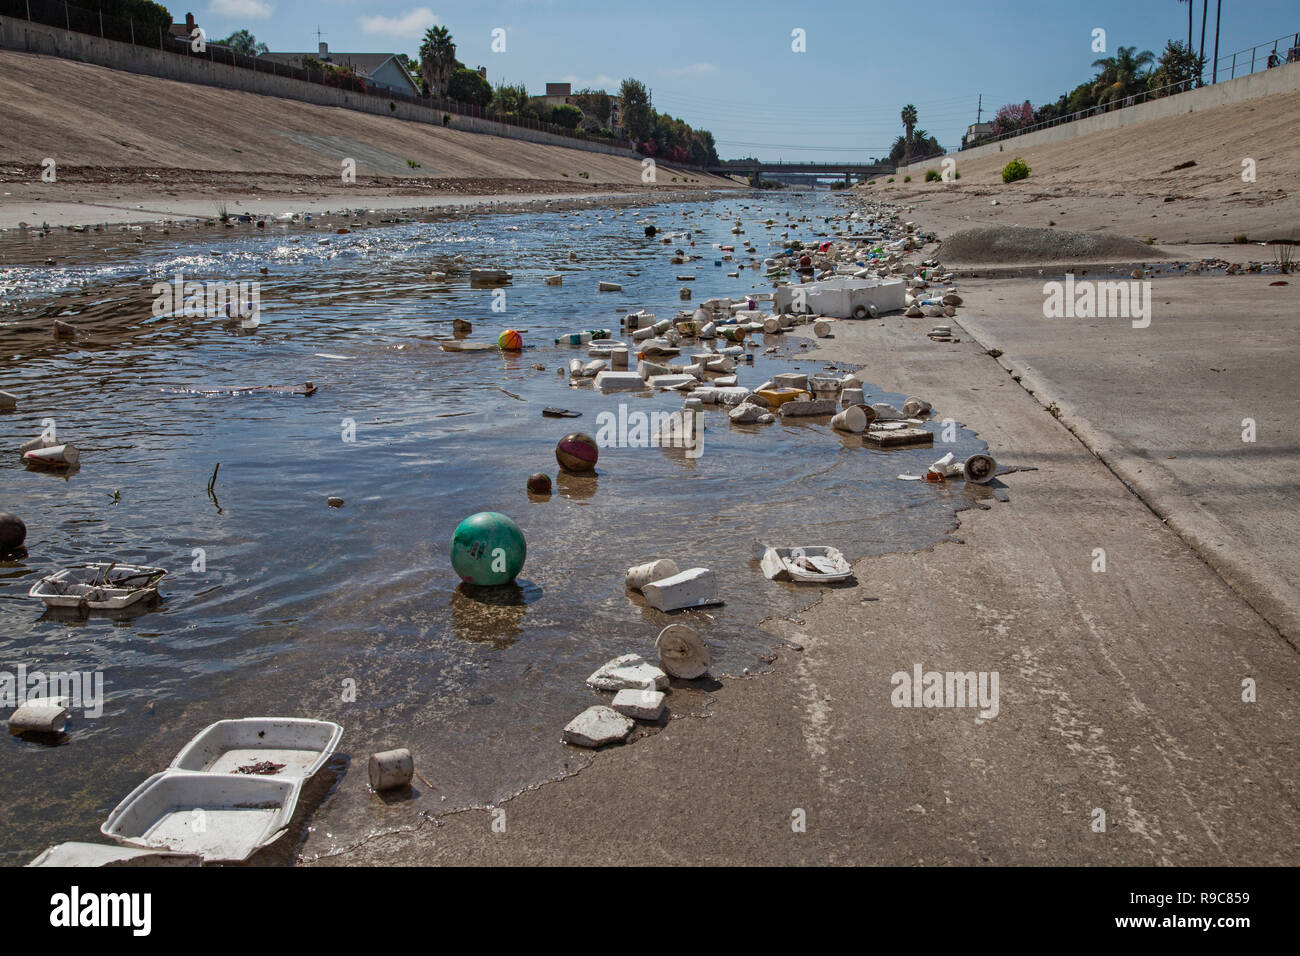 Large amounts of trash and plastic refuse collect in Ballona Creek after first major rain storm of the season. Ballona Creek. Once a meandering creek, Stock Photo